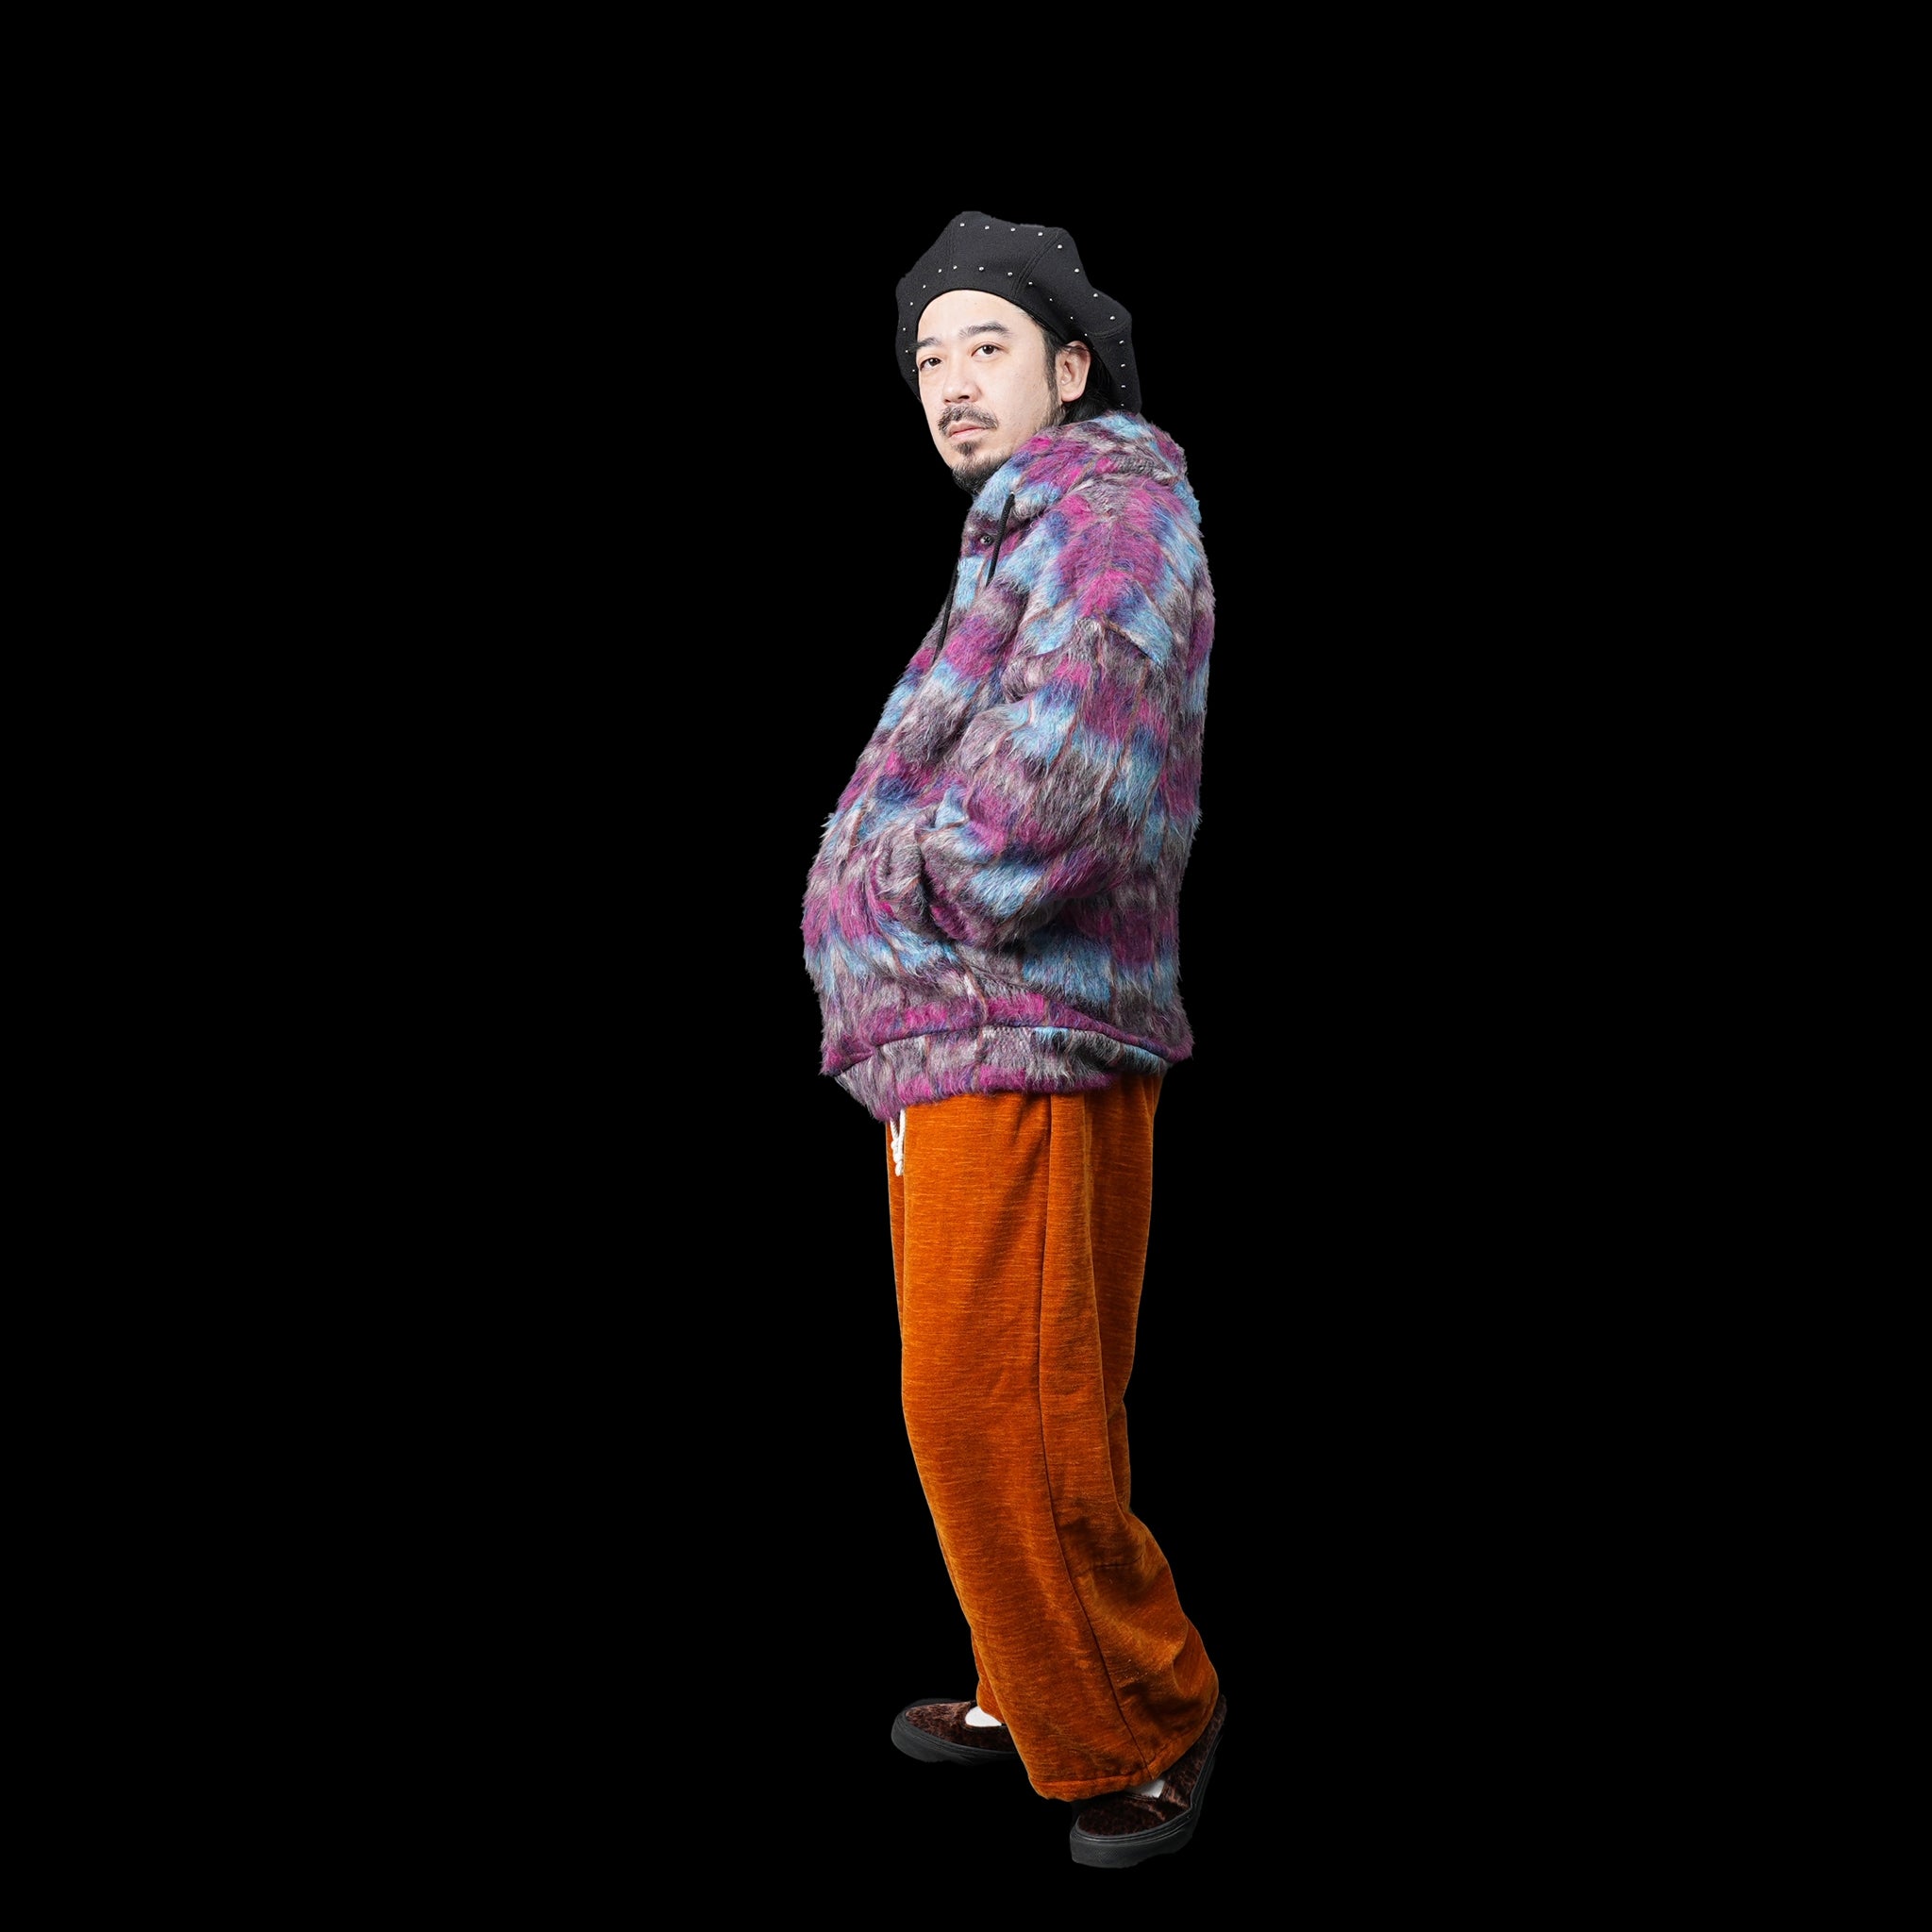 No:23aw-spot03 | Name:VELVET WIDE EASY PANT | Color:Mustrad/Orange/Beige | 【SHADY’S VALLEY】【Big P Products_ビッグピープロダクツ】